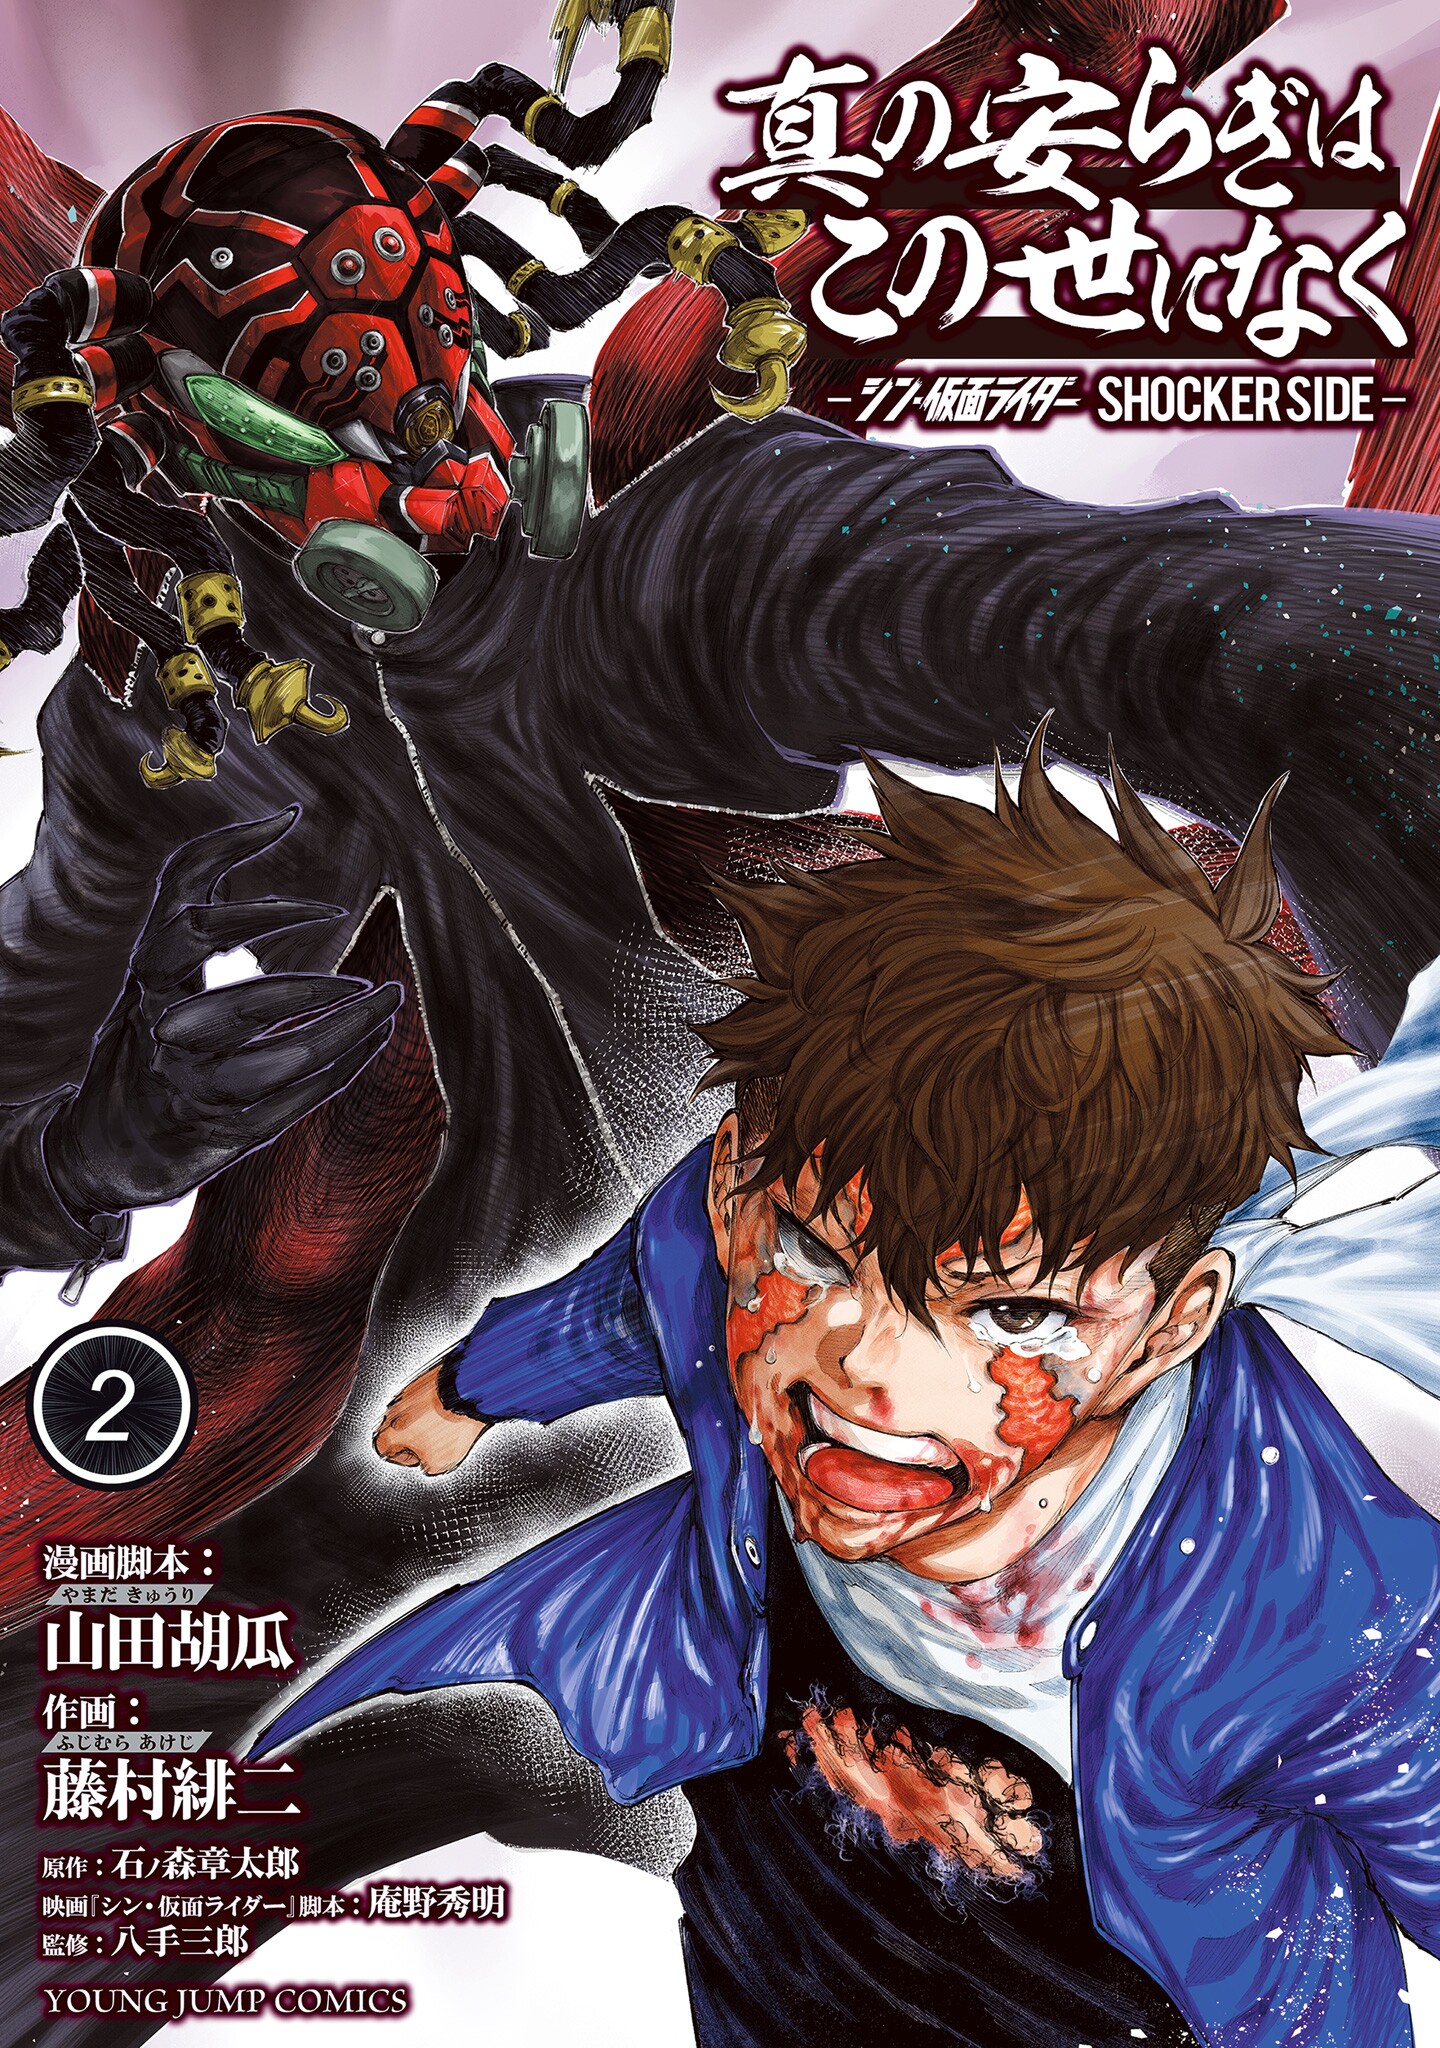 There Is No True Peace in This World -Shin Kamen Rider SHOCKER SIDE- cover 2